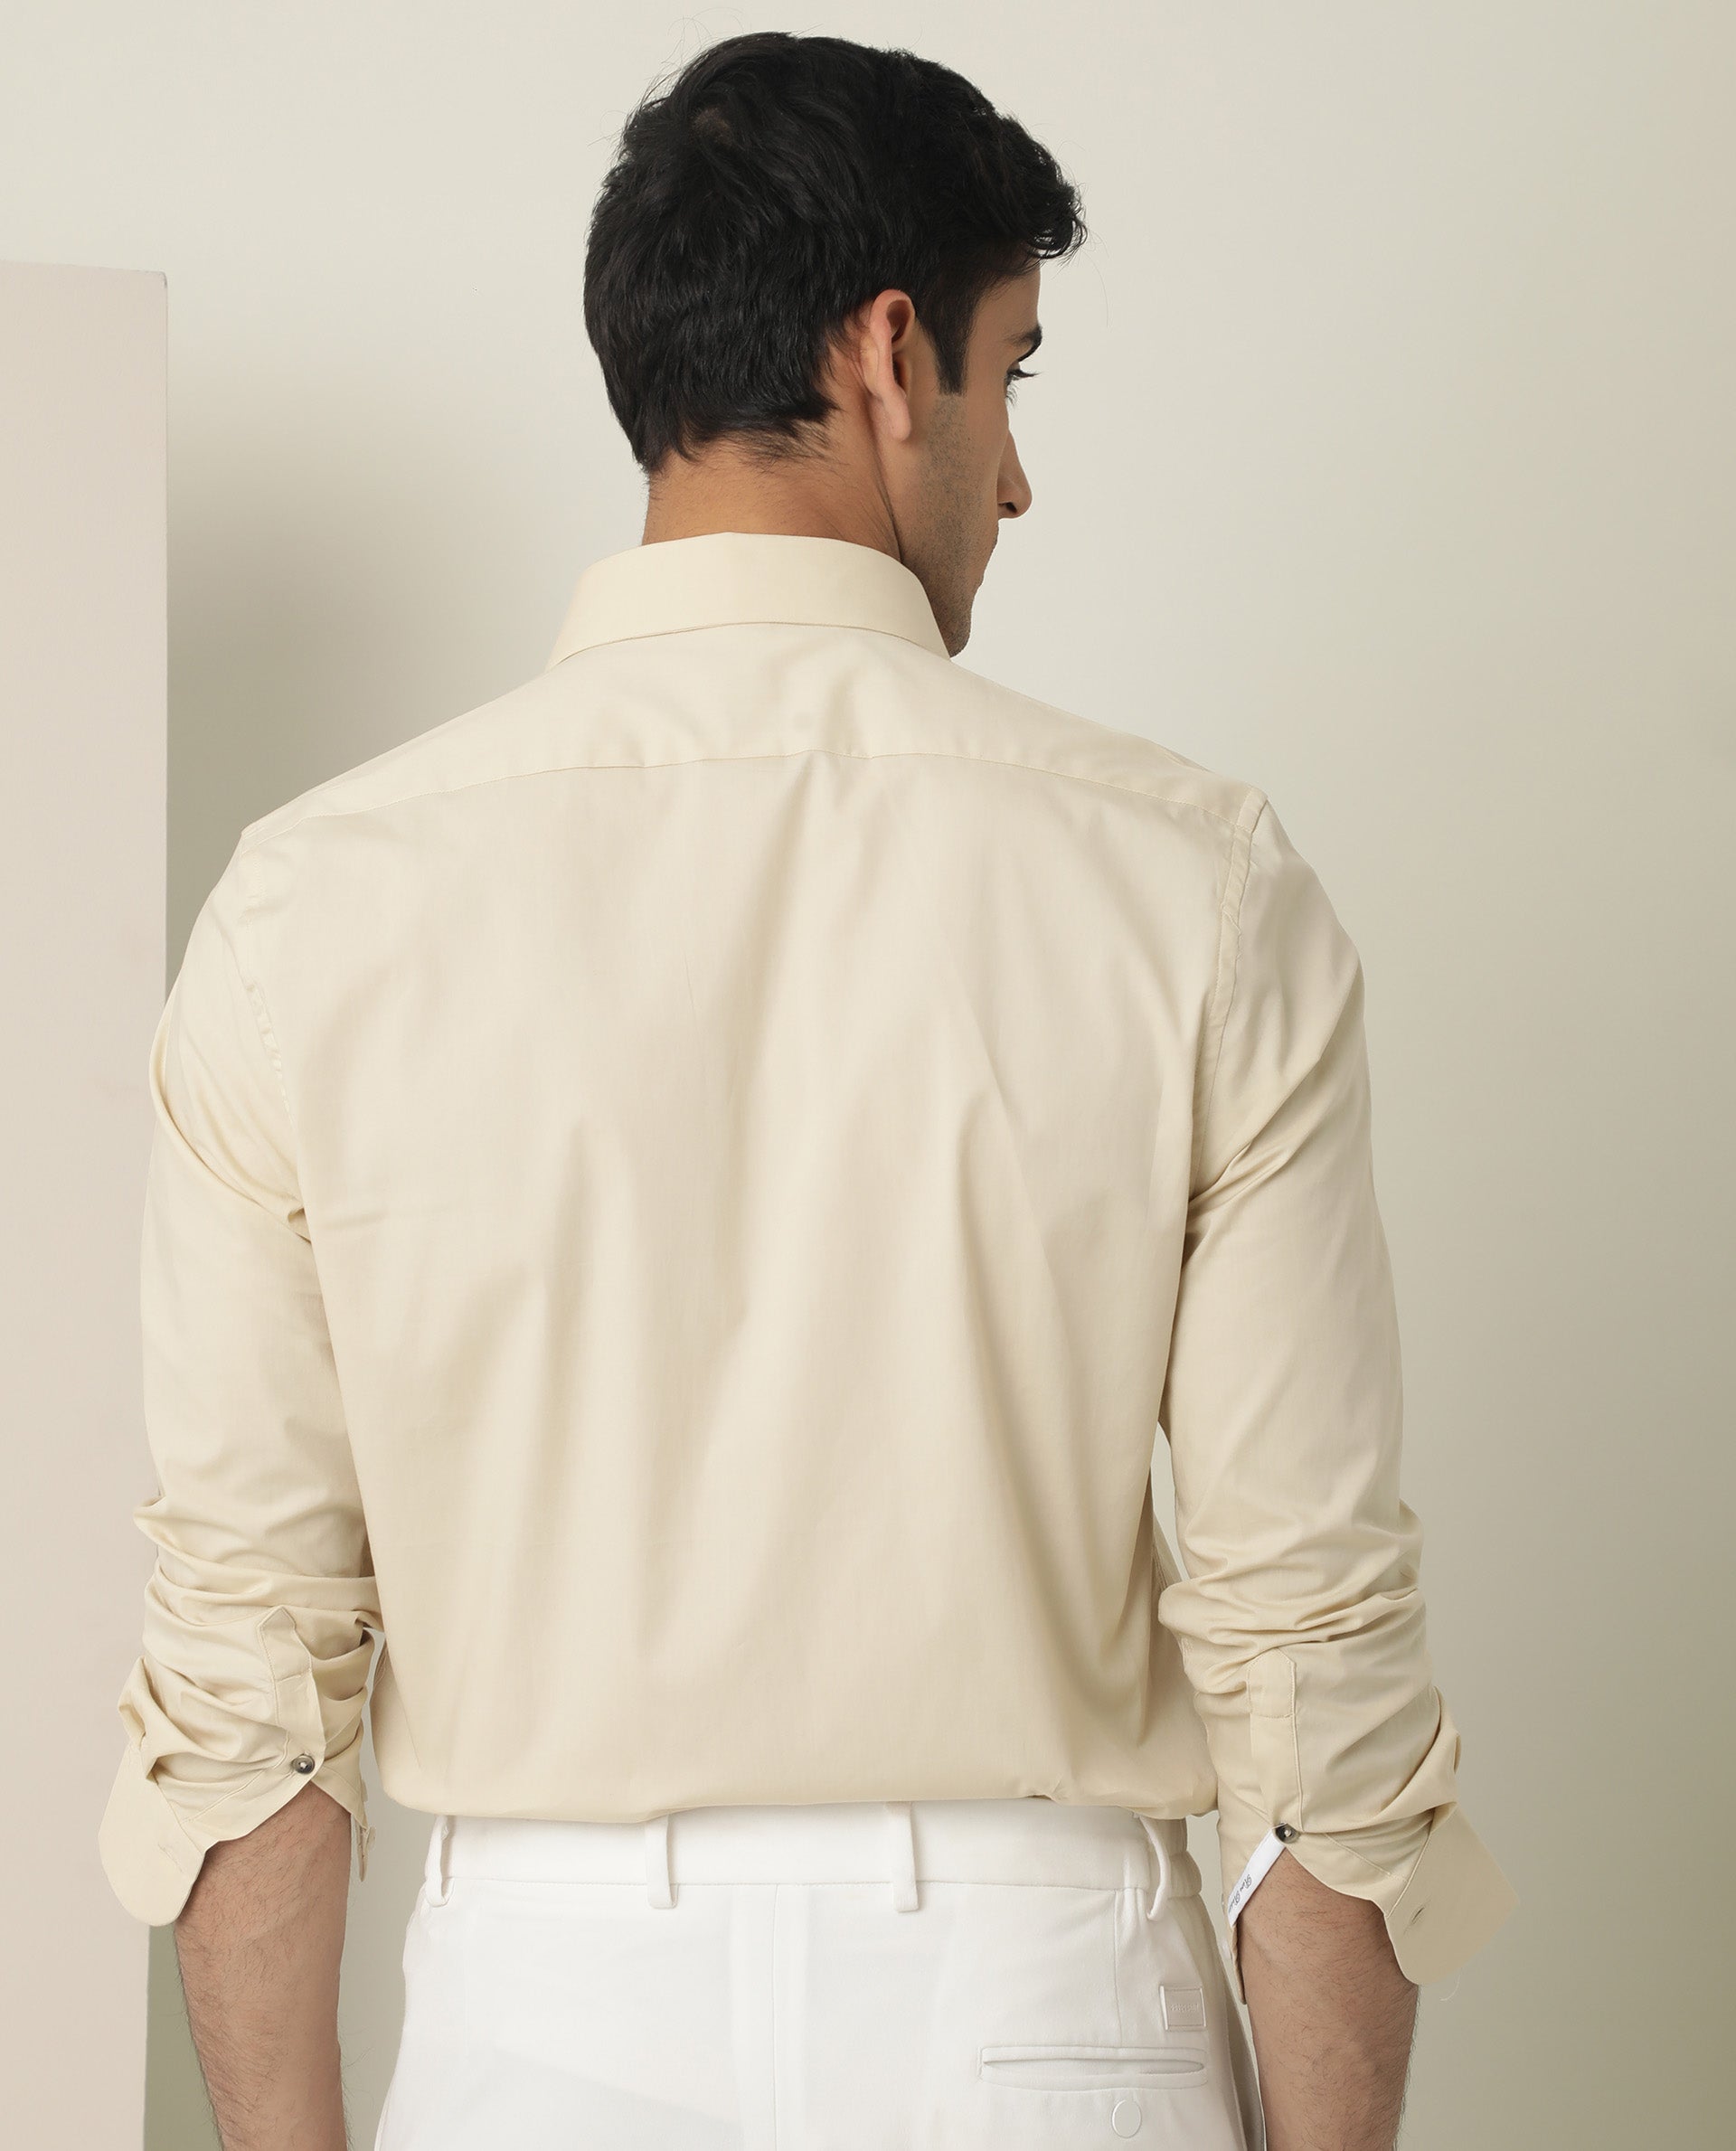 Allen Solly Casual Shirts  Buy Allen Solly Men Yellow Shirt Online  Nykaa  Fashion